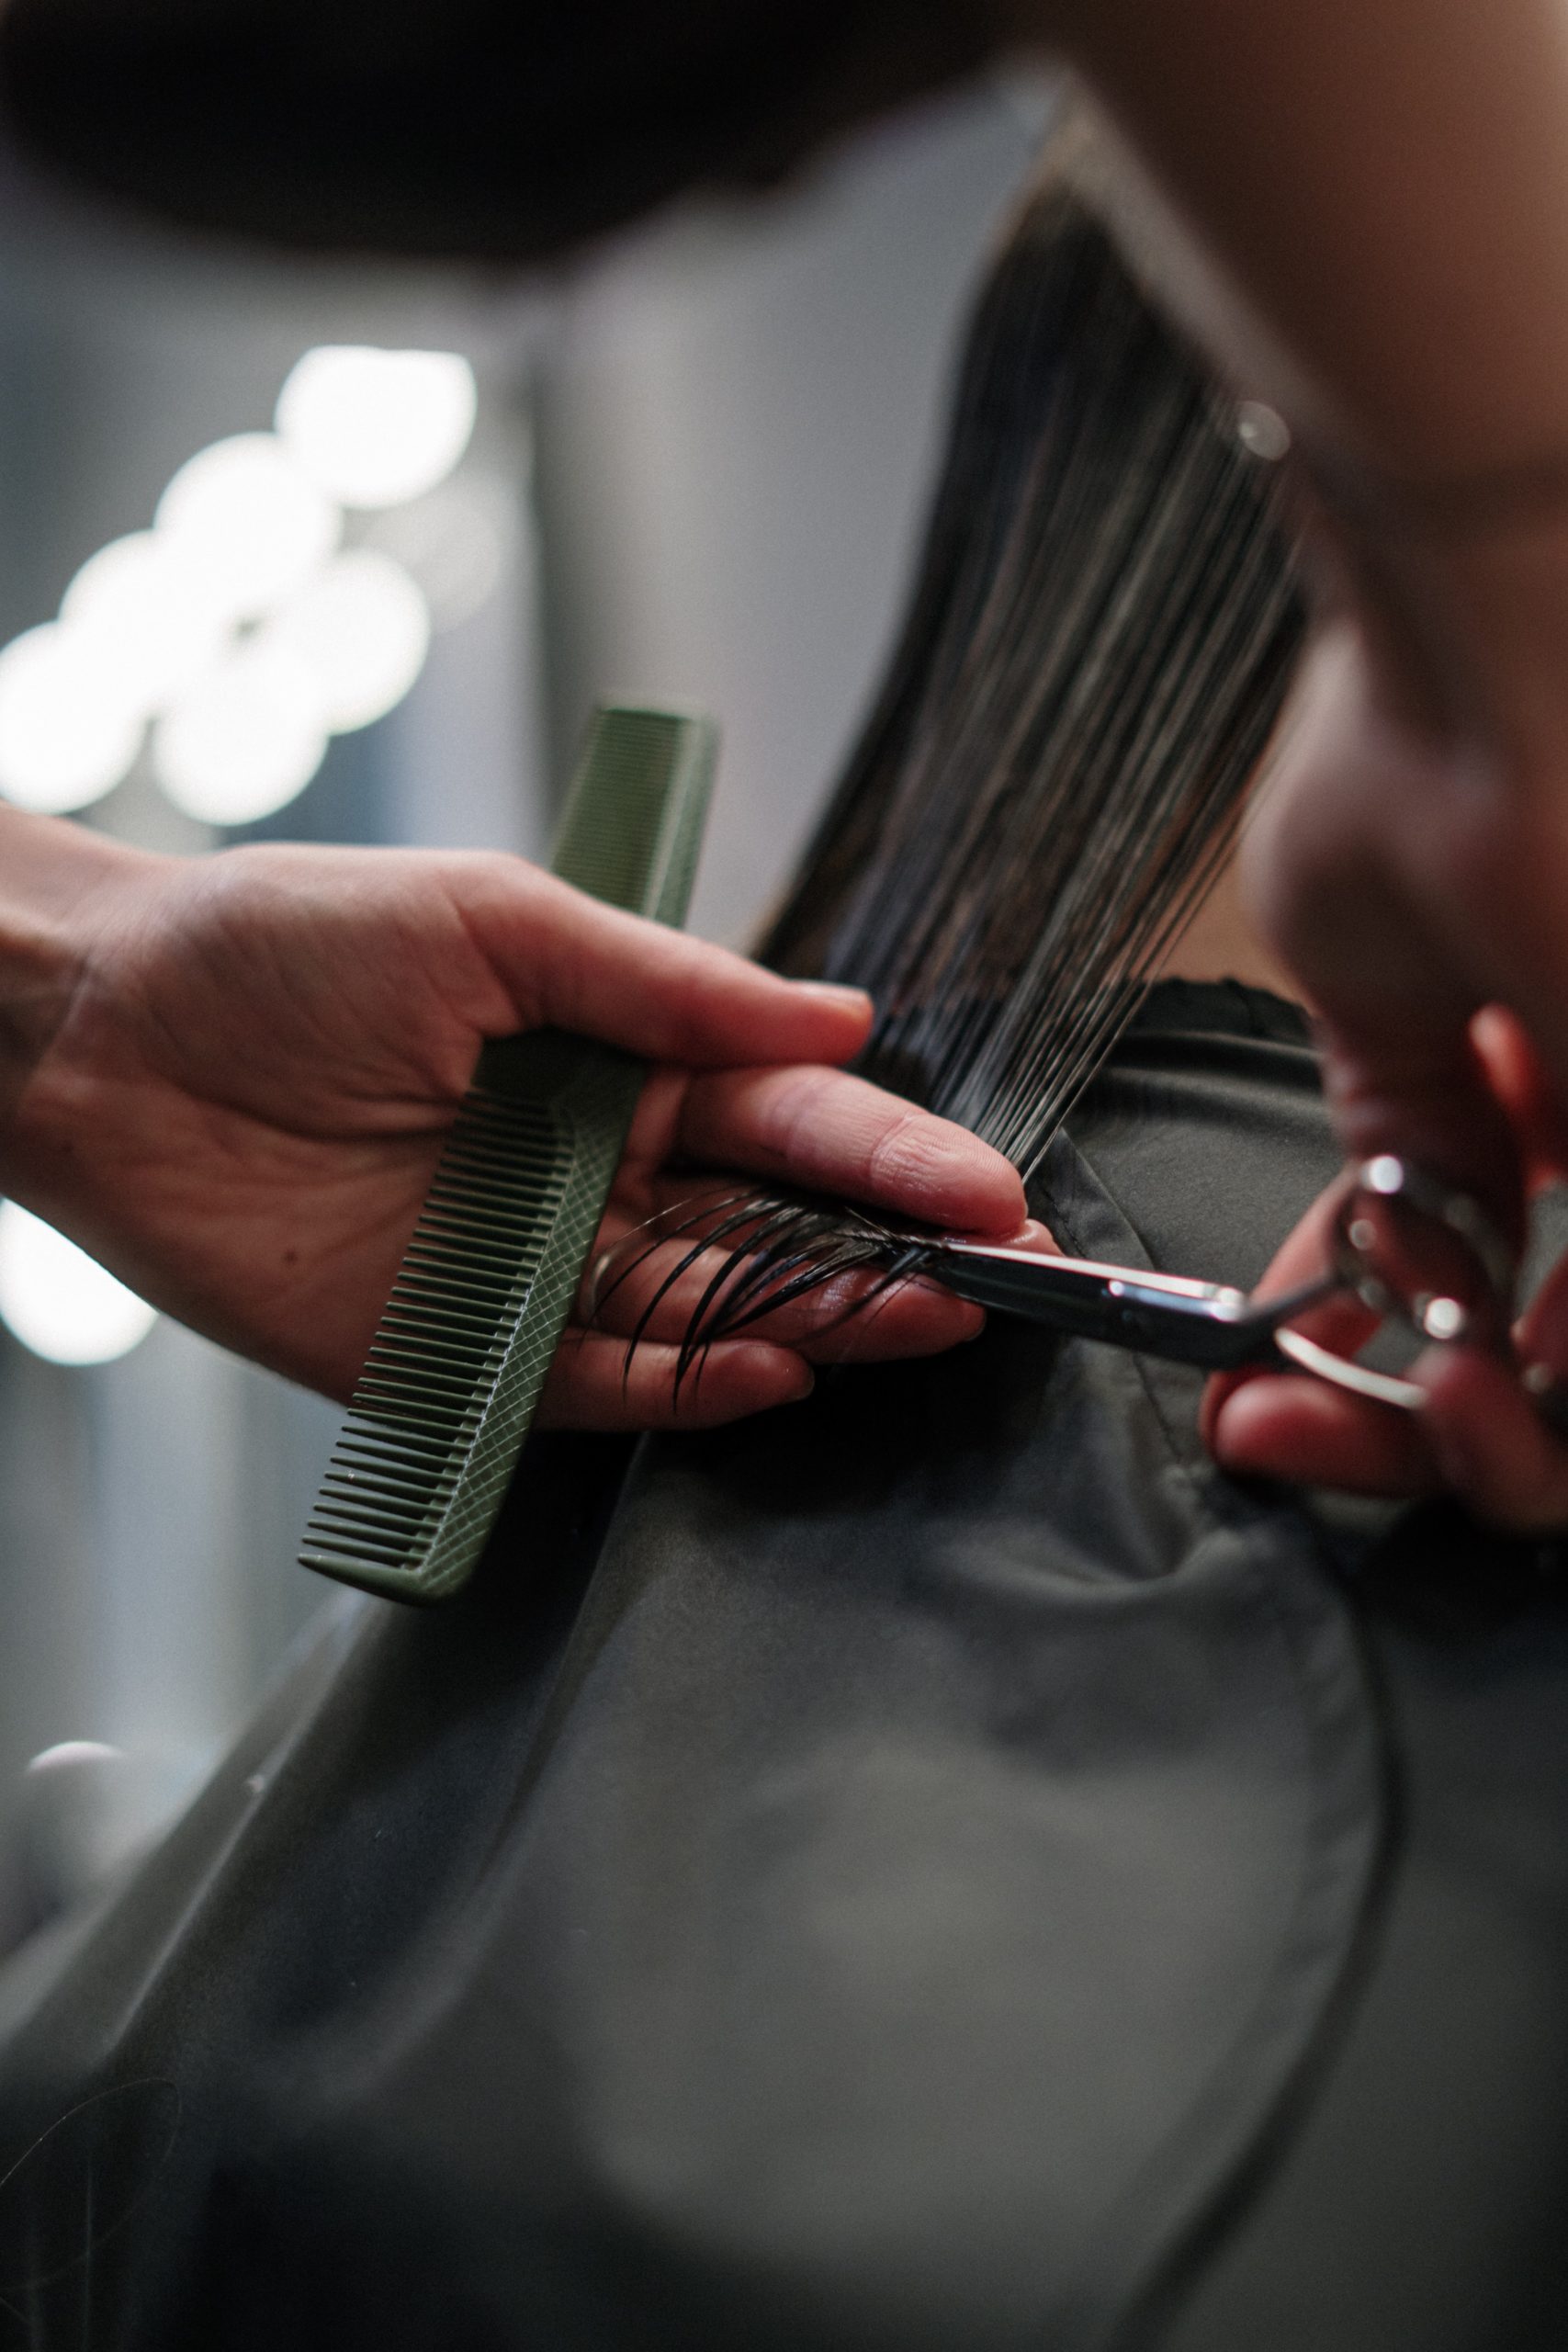 Does Time-Based Pricing Make Sense For Your Salon?